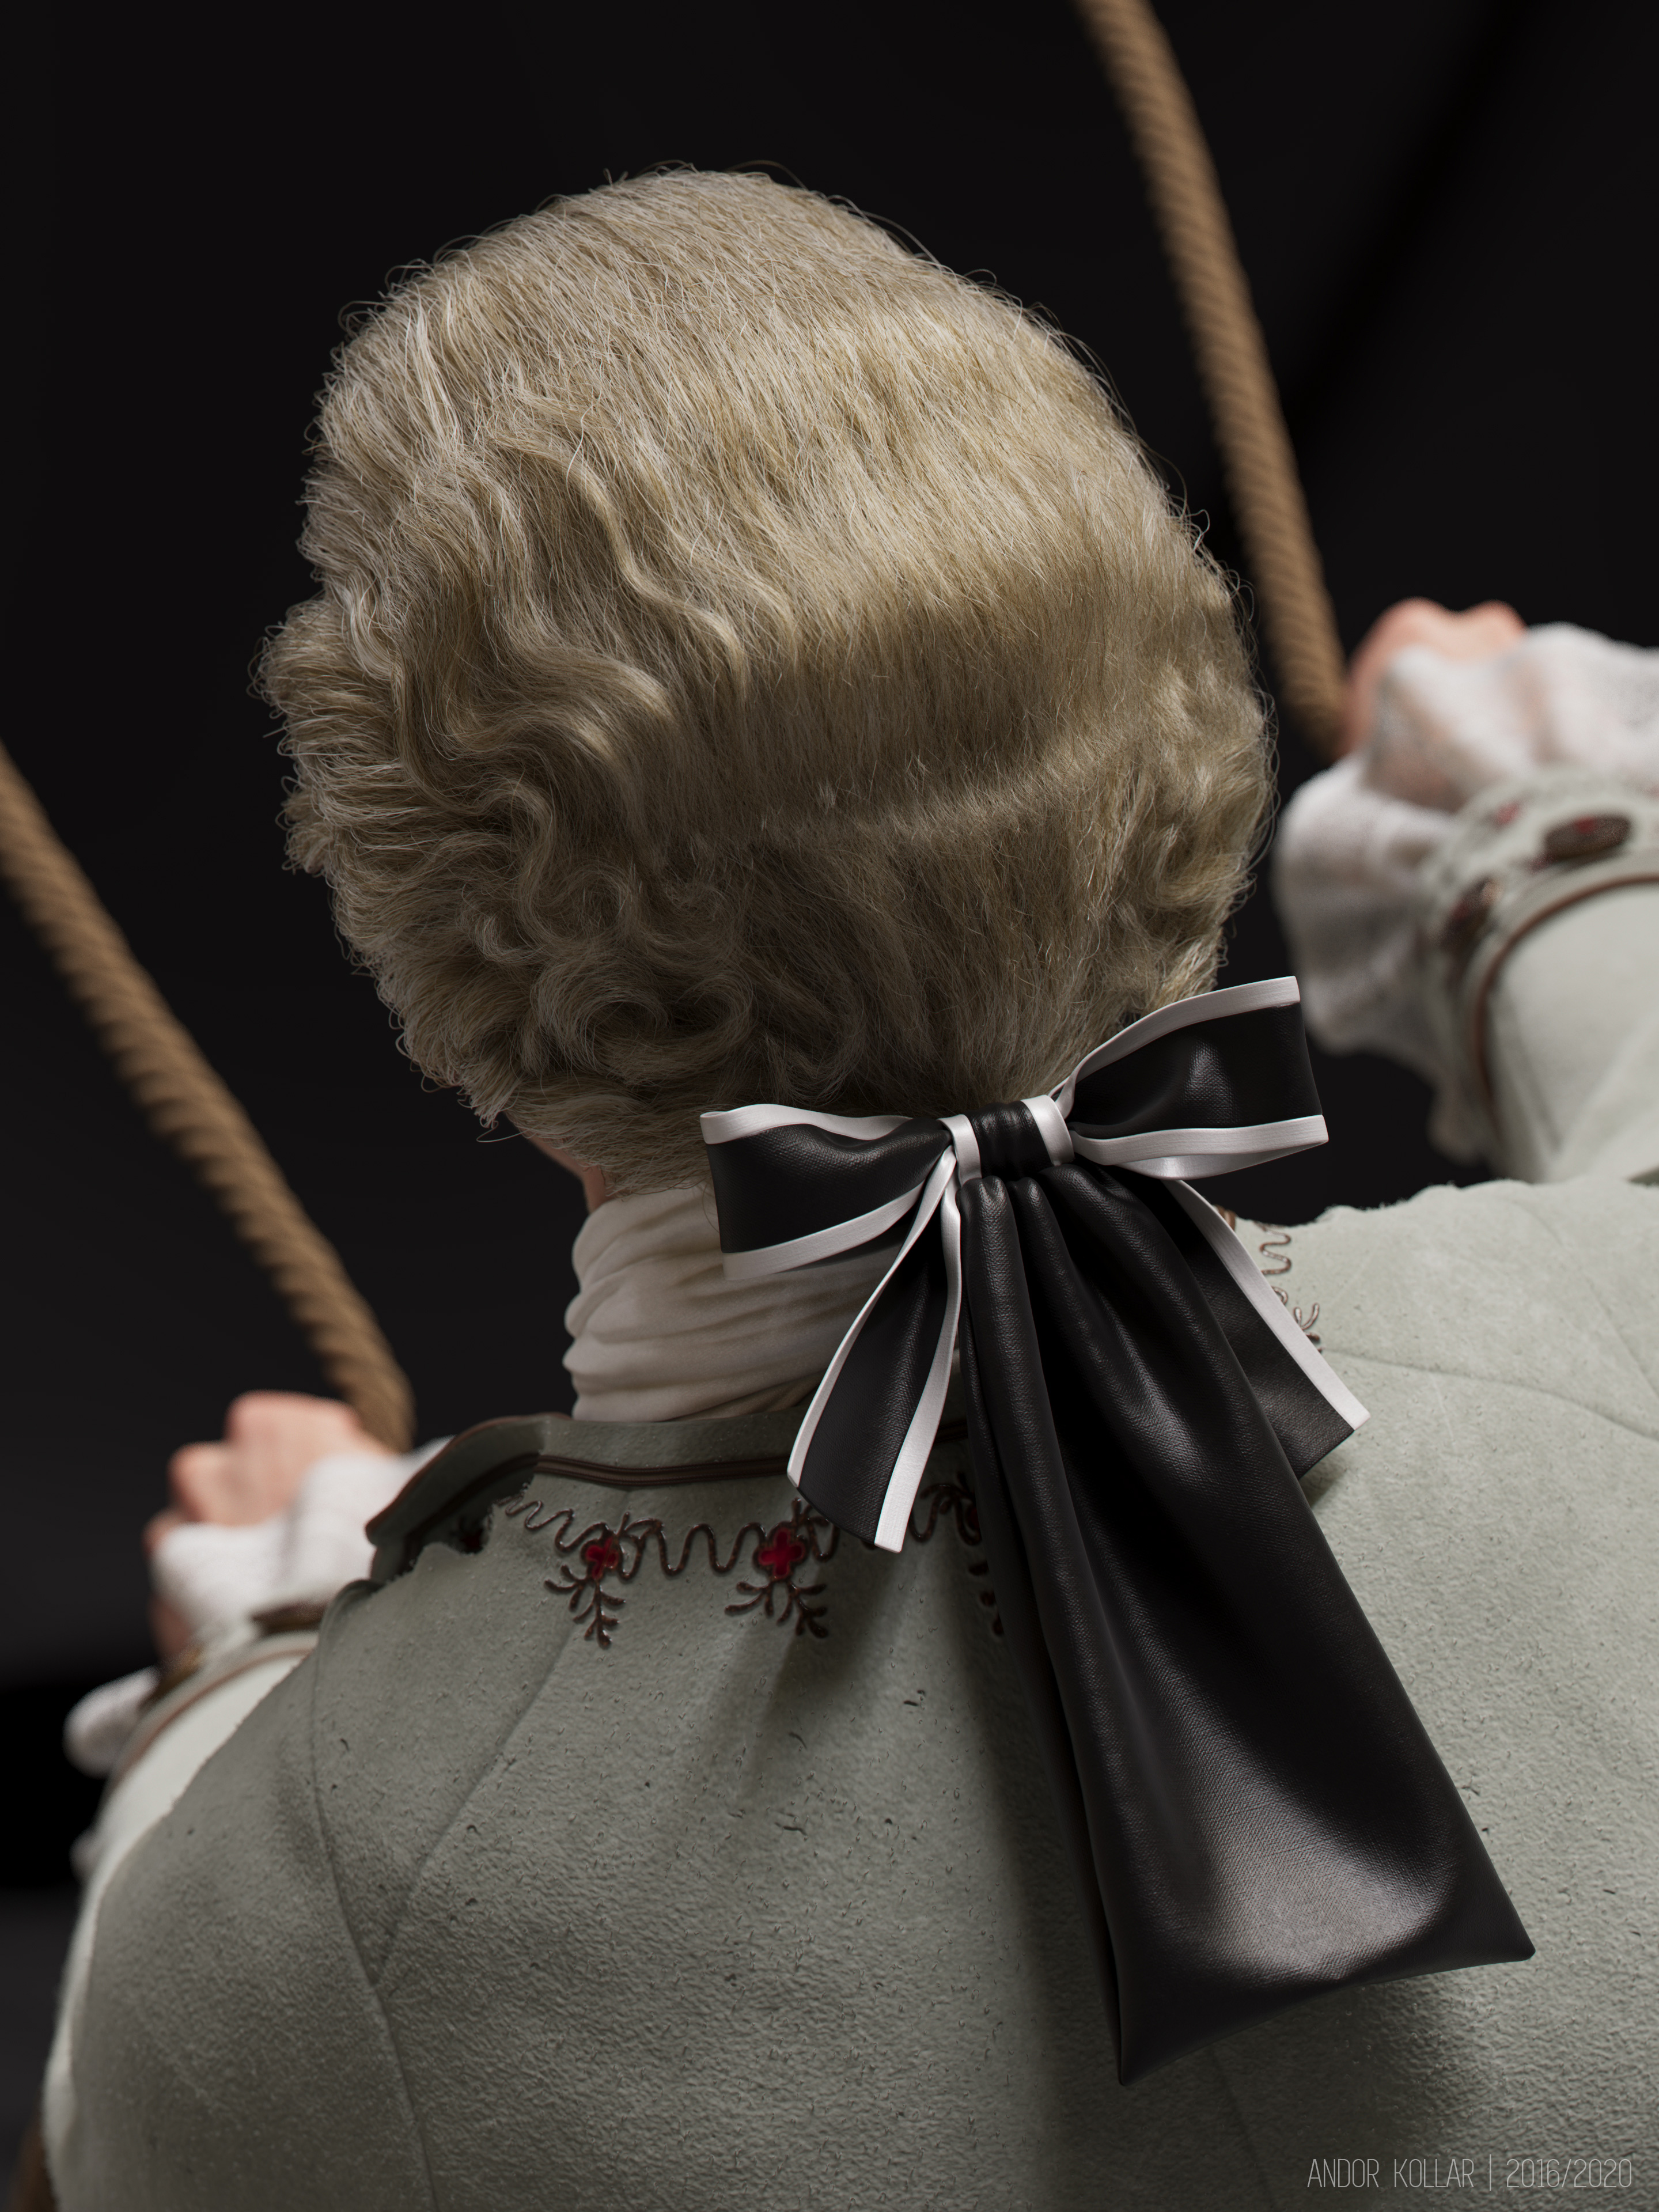 3d artwork of Andor Kollar in Maya with Arnold renderer, head, XGen hair, Jonathan Pryce as aristocrat with 18th costume, laces, scarf, wig and bow